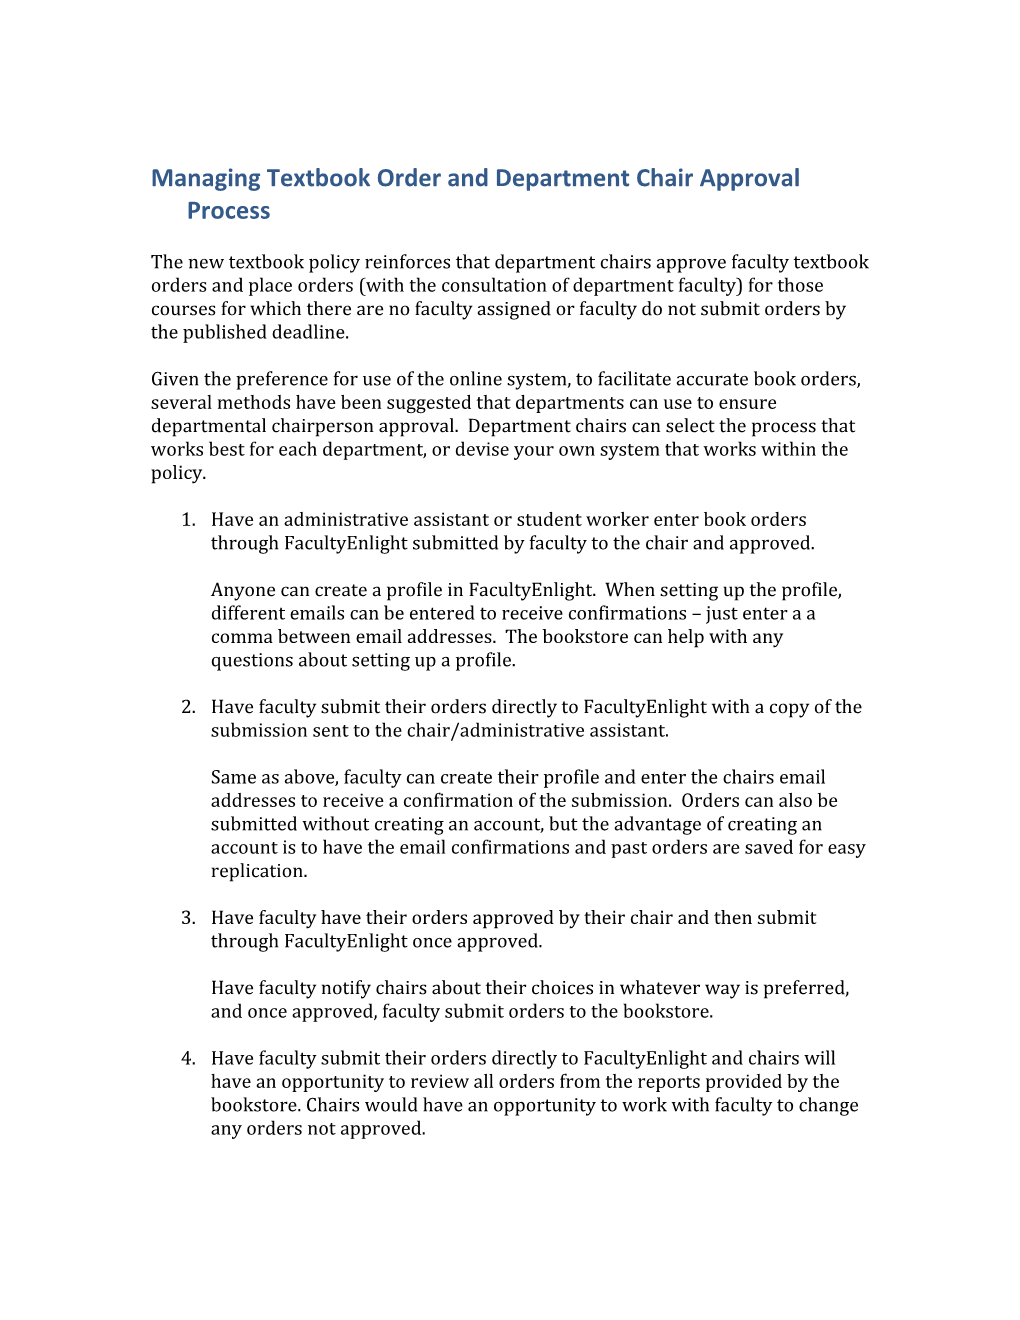 Managing Textbook Order and Department Chair Approval Process